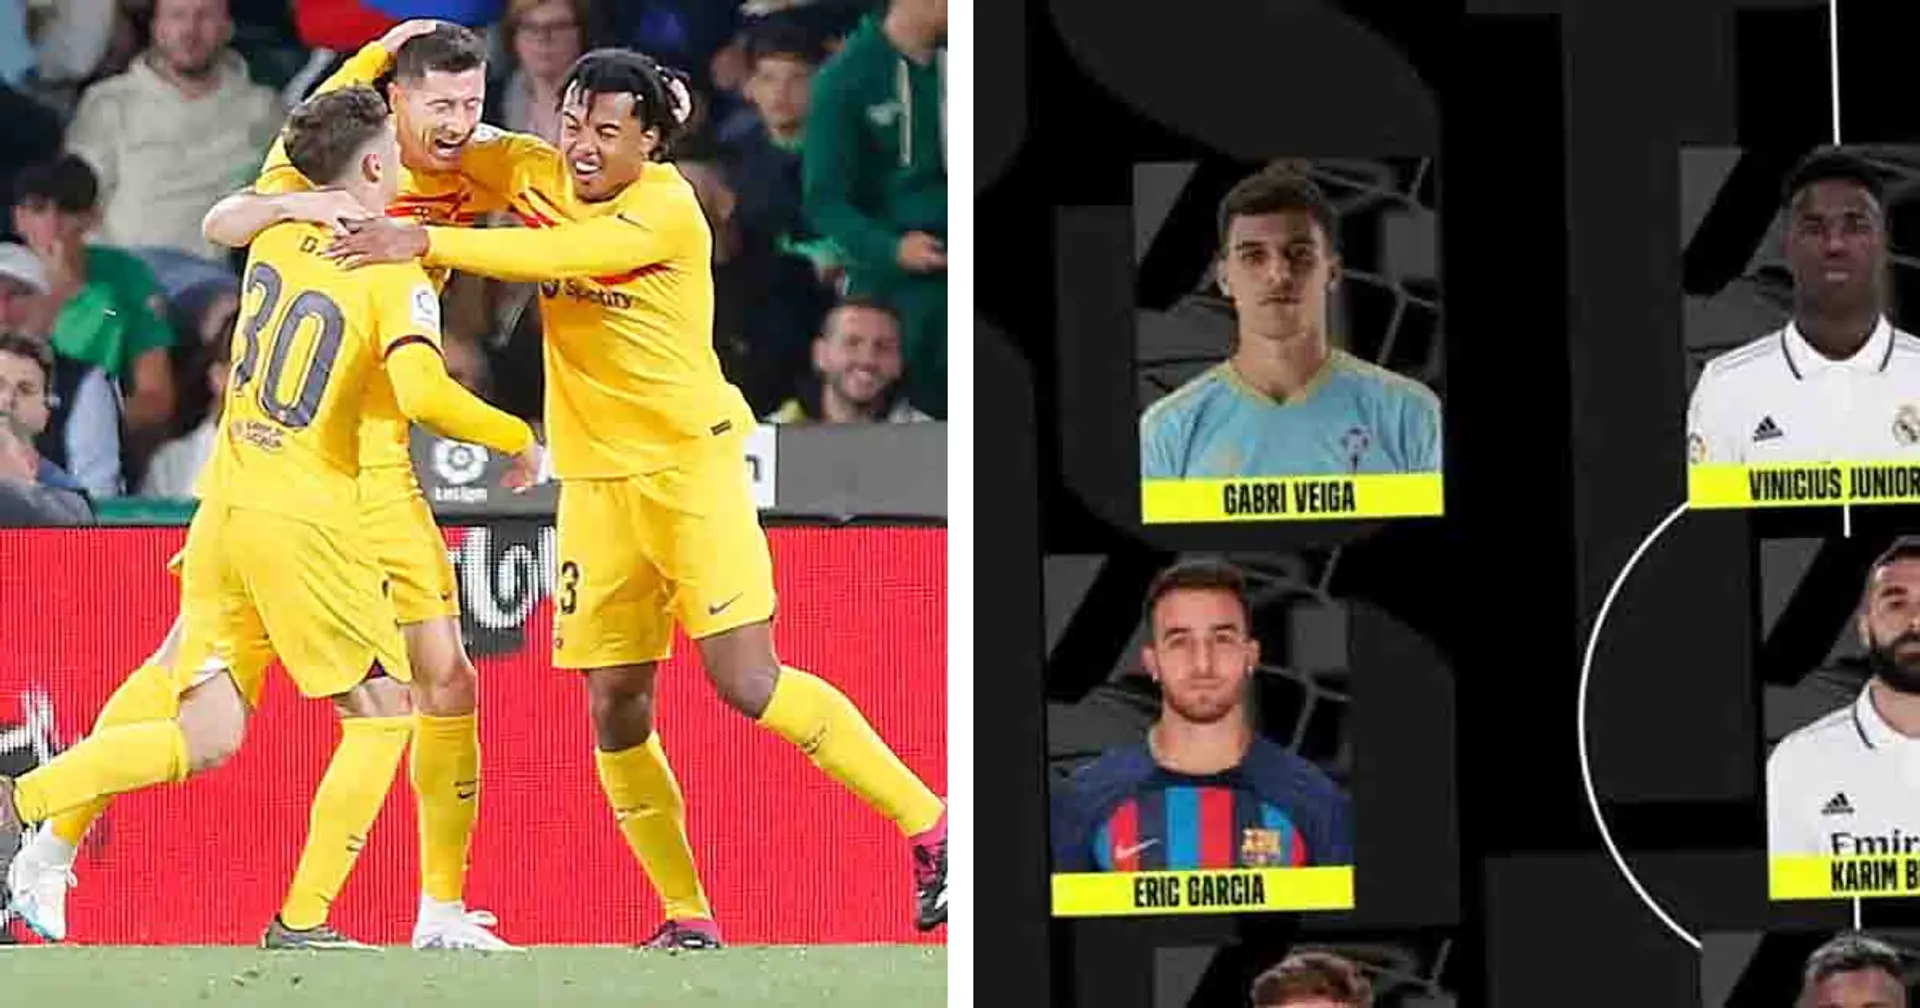 Barca see four players included in La Liga team of the week - Lewandowski snubbed